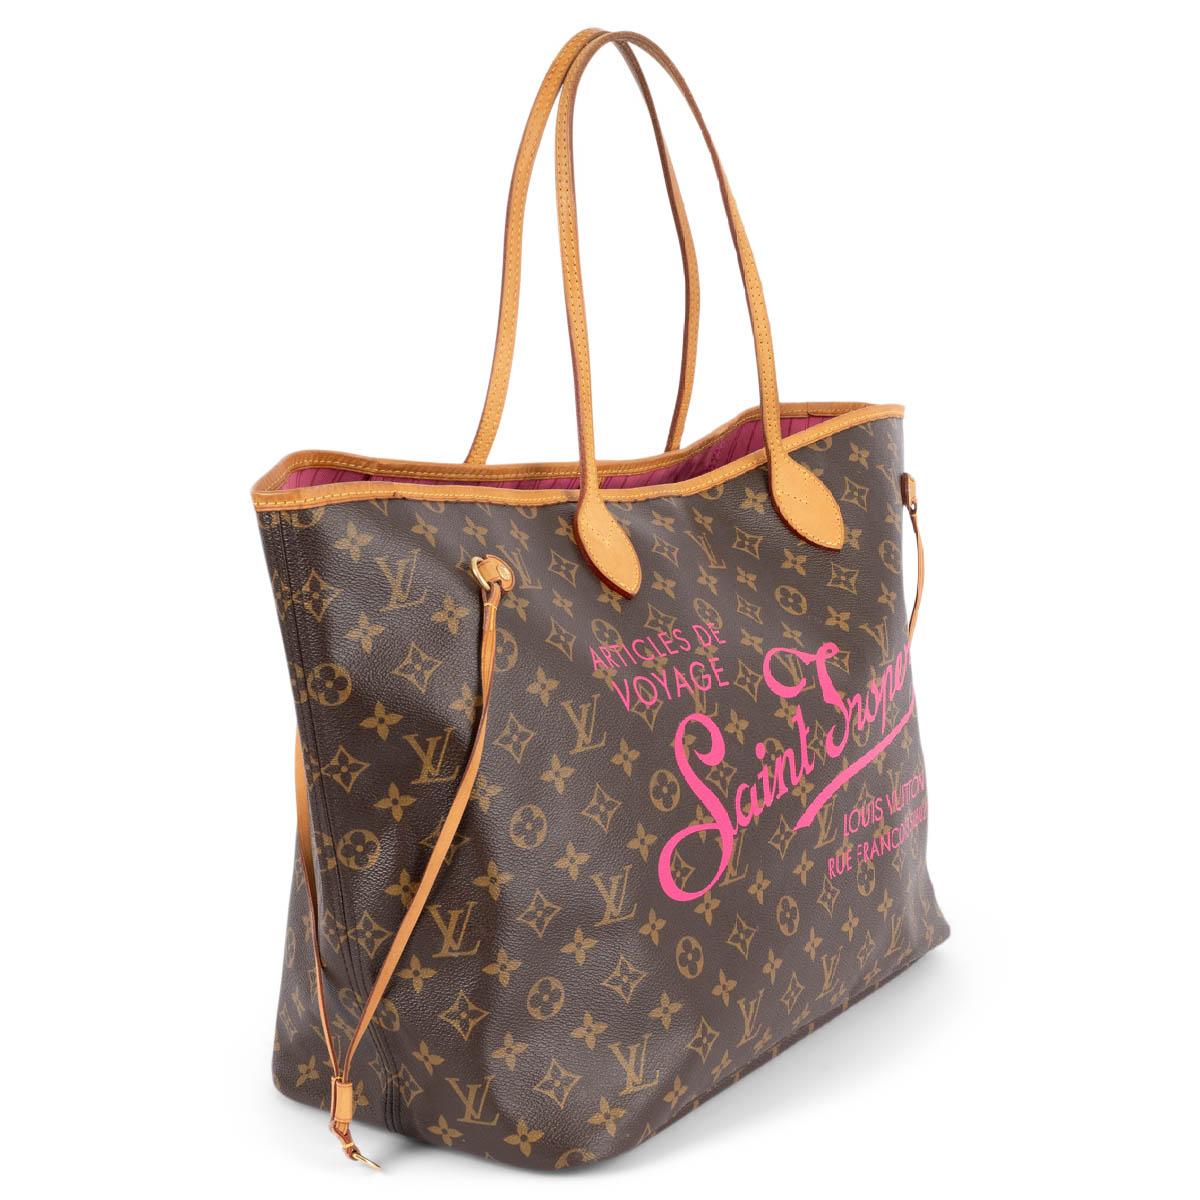 100% authentic Louis Vuitton Neverfull GM shopper in brown Monogram canvas with natural leather trims and pink Saint Tropez print. Limited edition of 500 pieces. Lined in striped canvas with an open pocket against the back. Has been carried and some